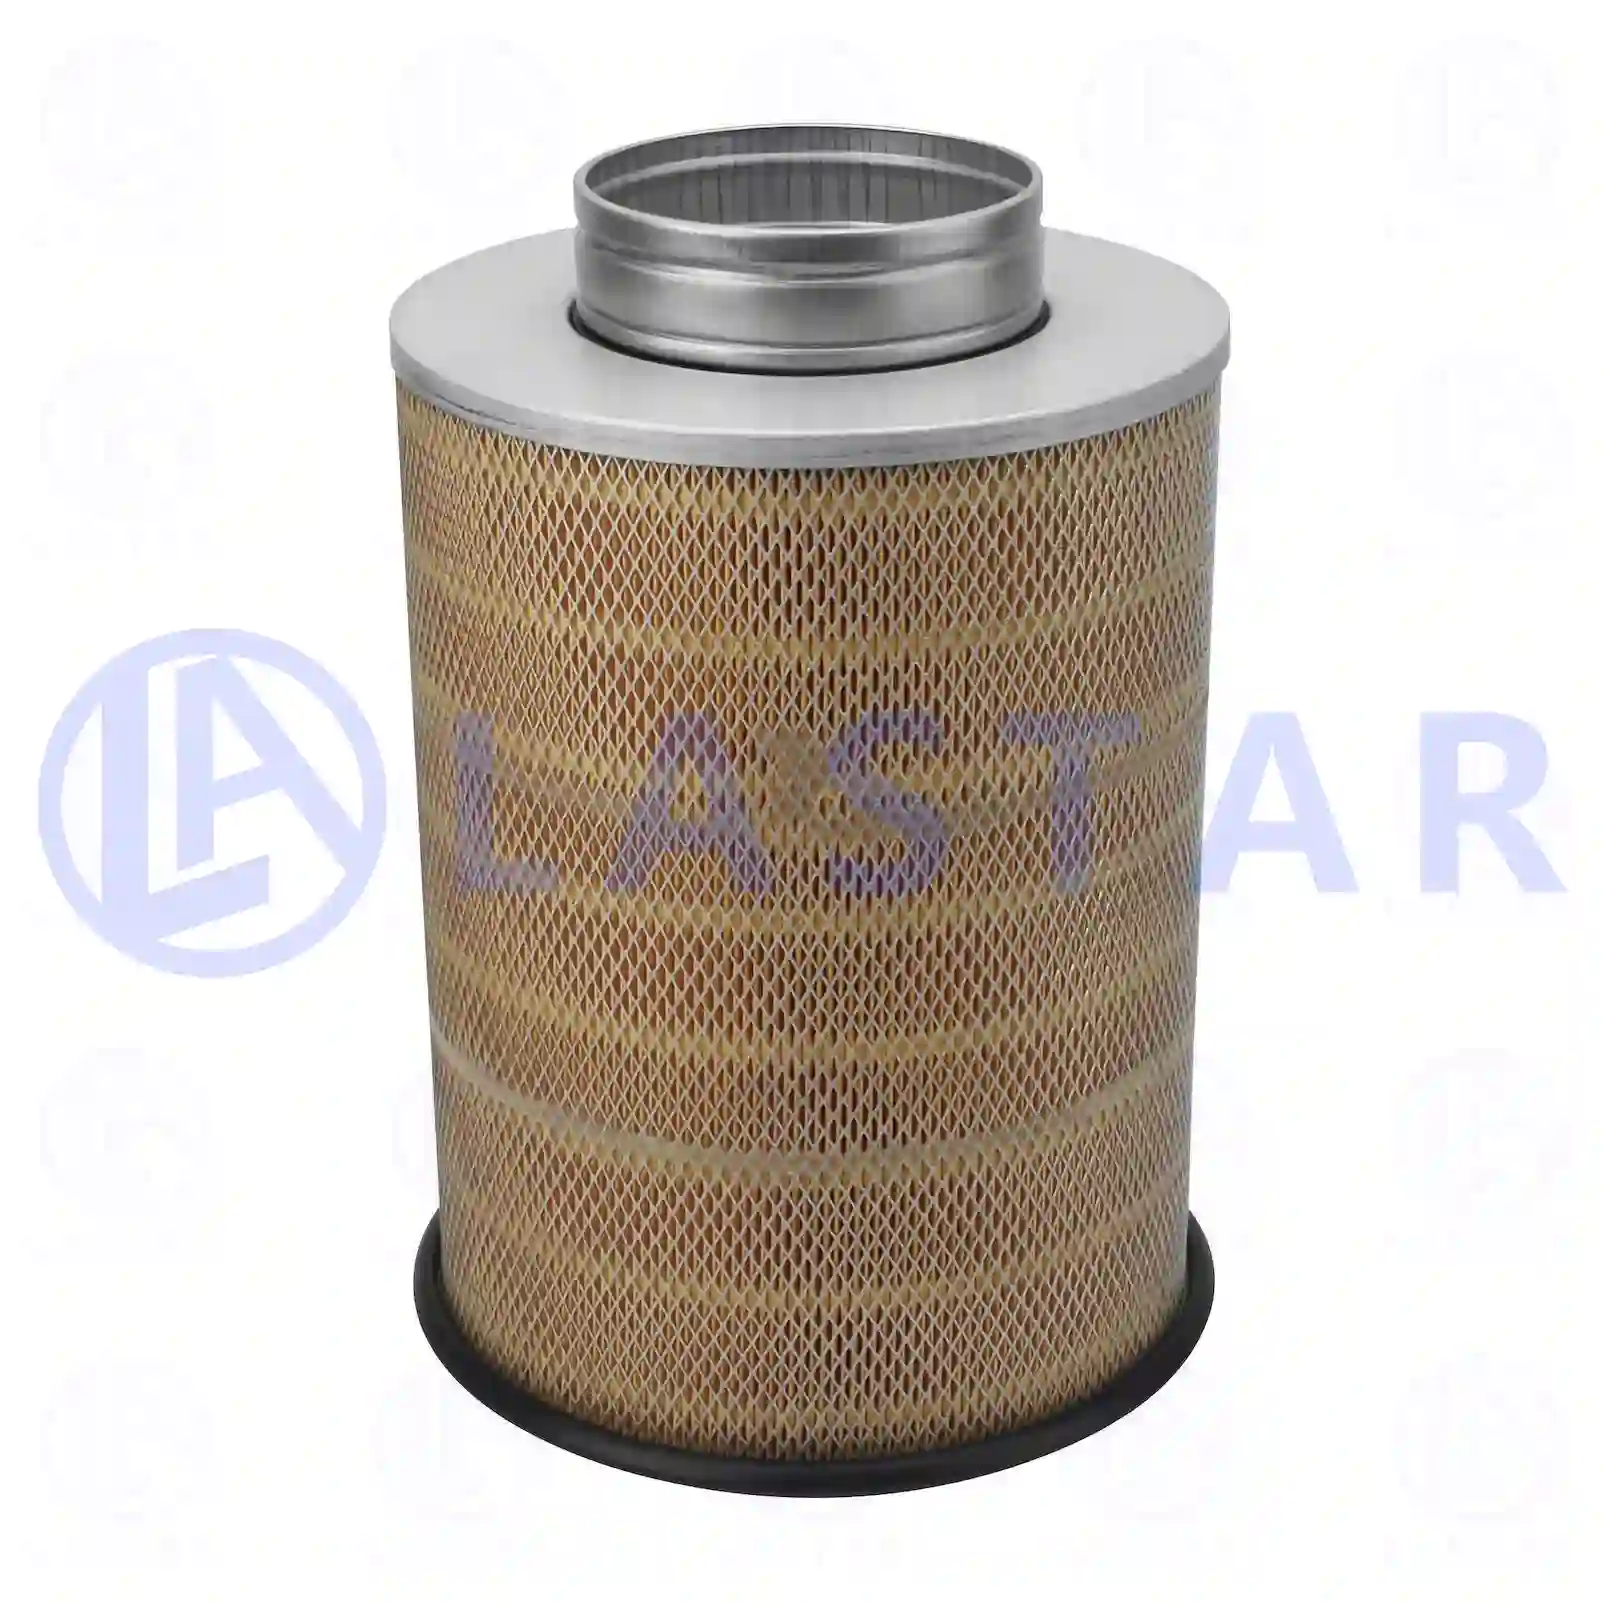 Air filter kit, 77706921, 8149064S ||  77706921 Lastar Spare Part | Truck Spare Parts, Auotomotive Spare Parts Air filter kit, 77706921, 8149064S ||  77706921 Lastar Spare Part | Truck Spare Parts, Auotomotive Spare Parts